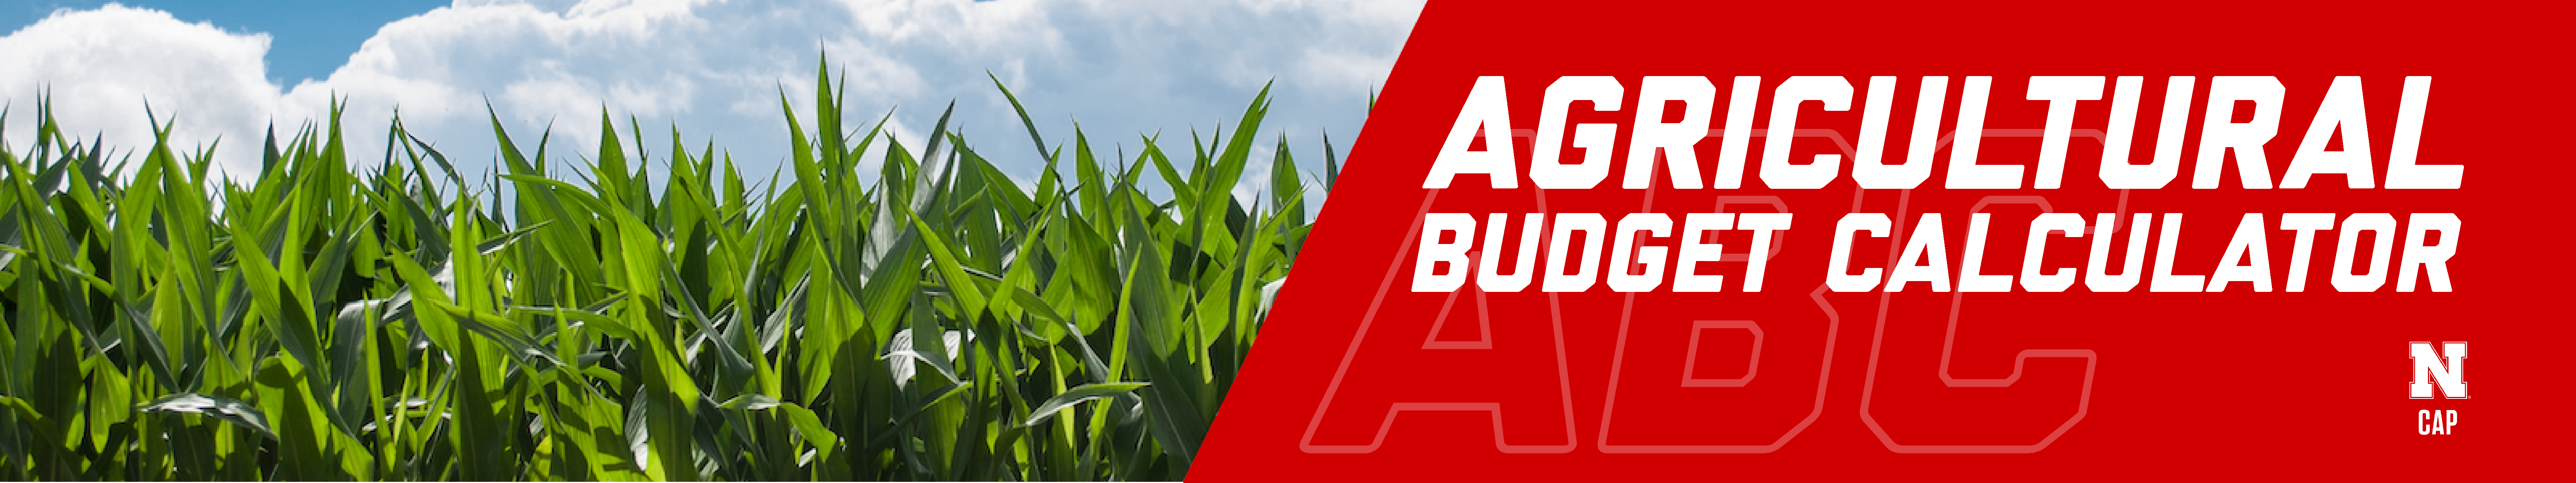 Picture of a cornfield with logo for Ag Budget Calculator